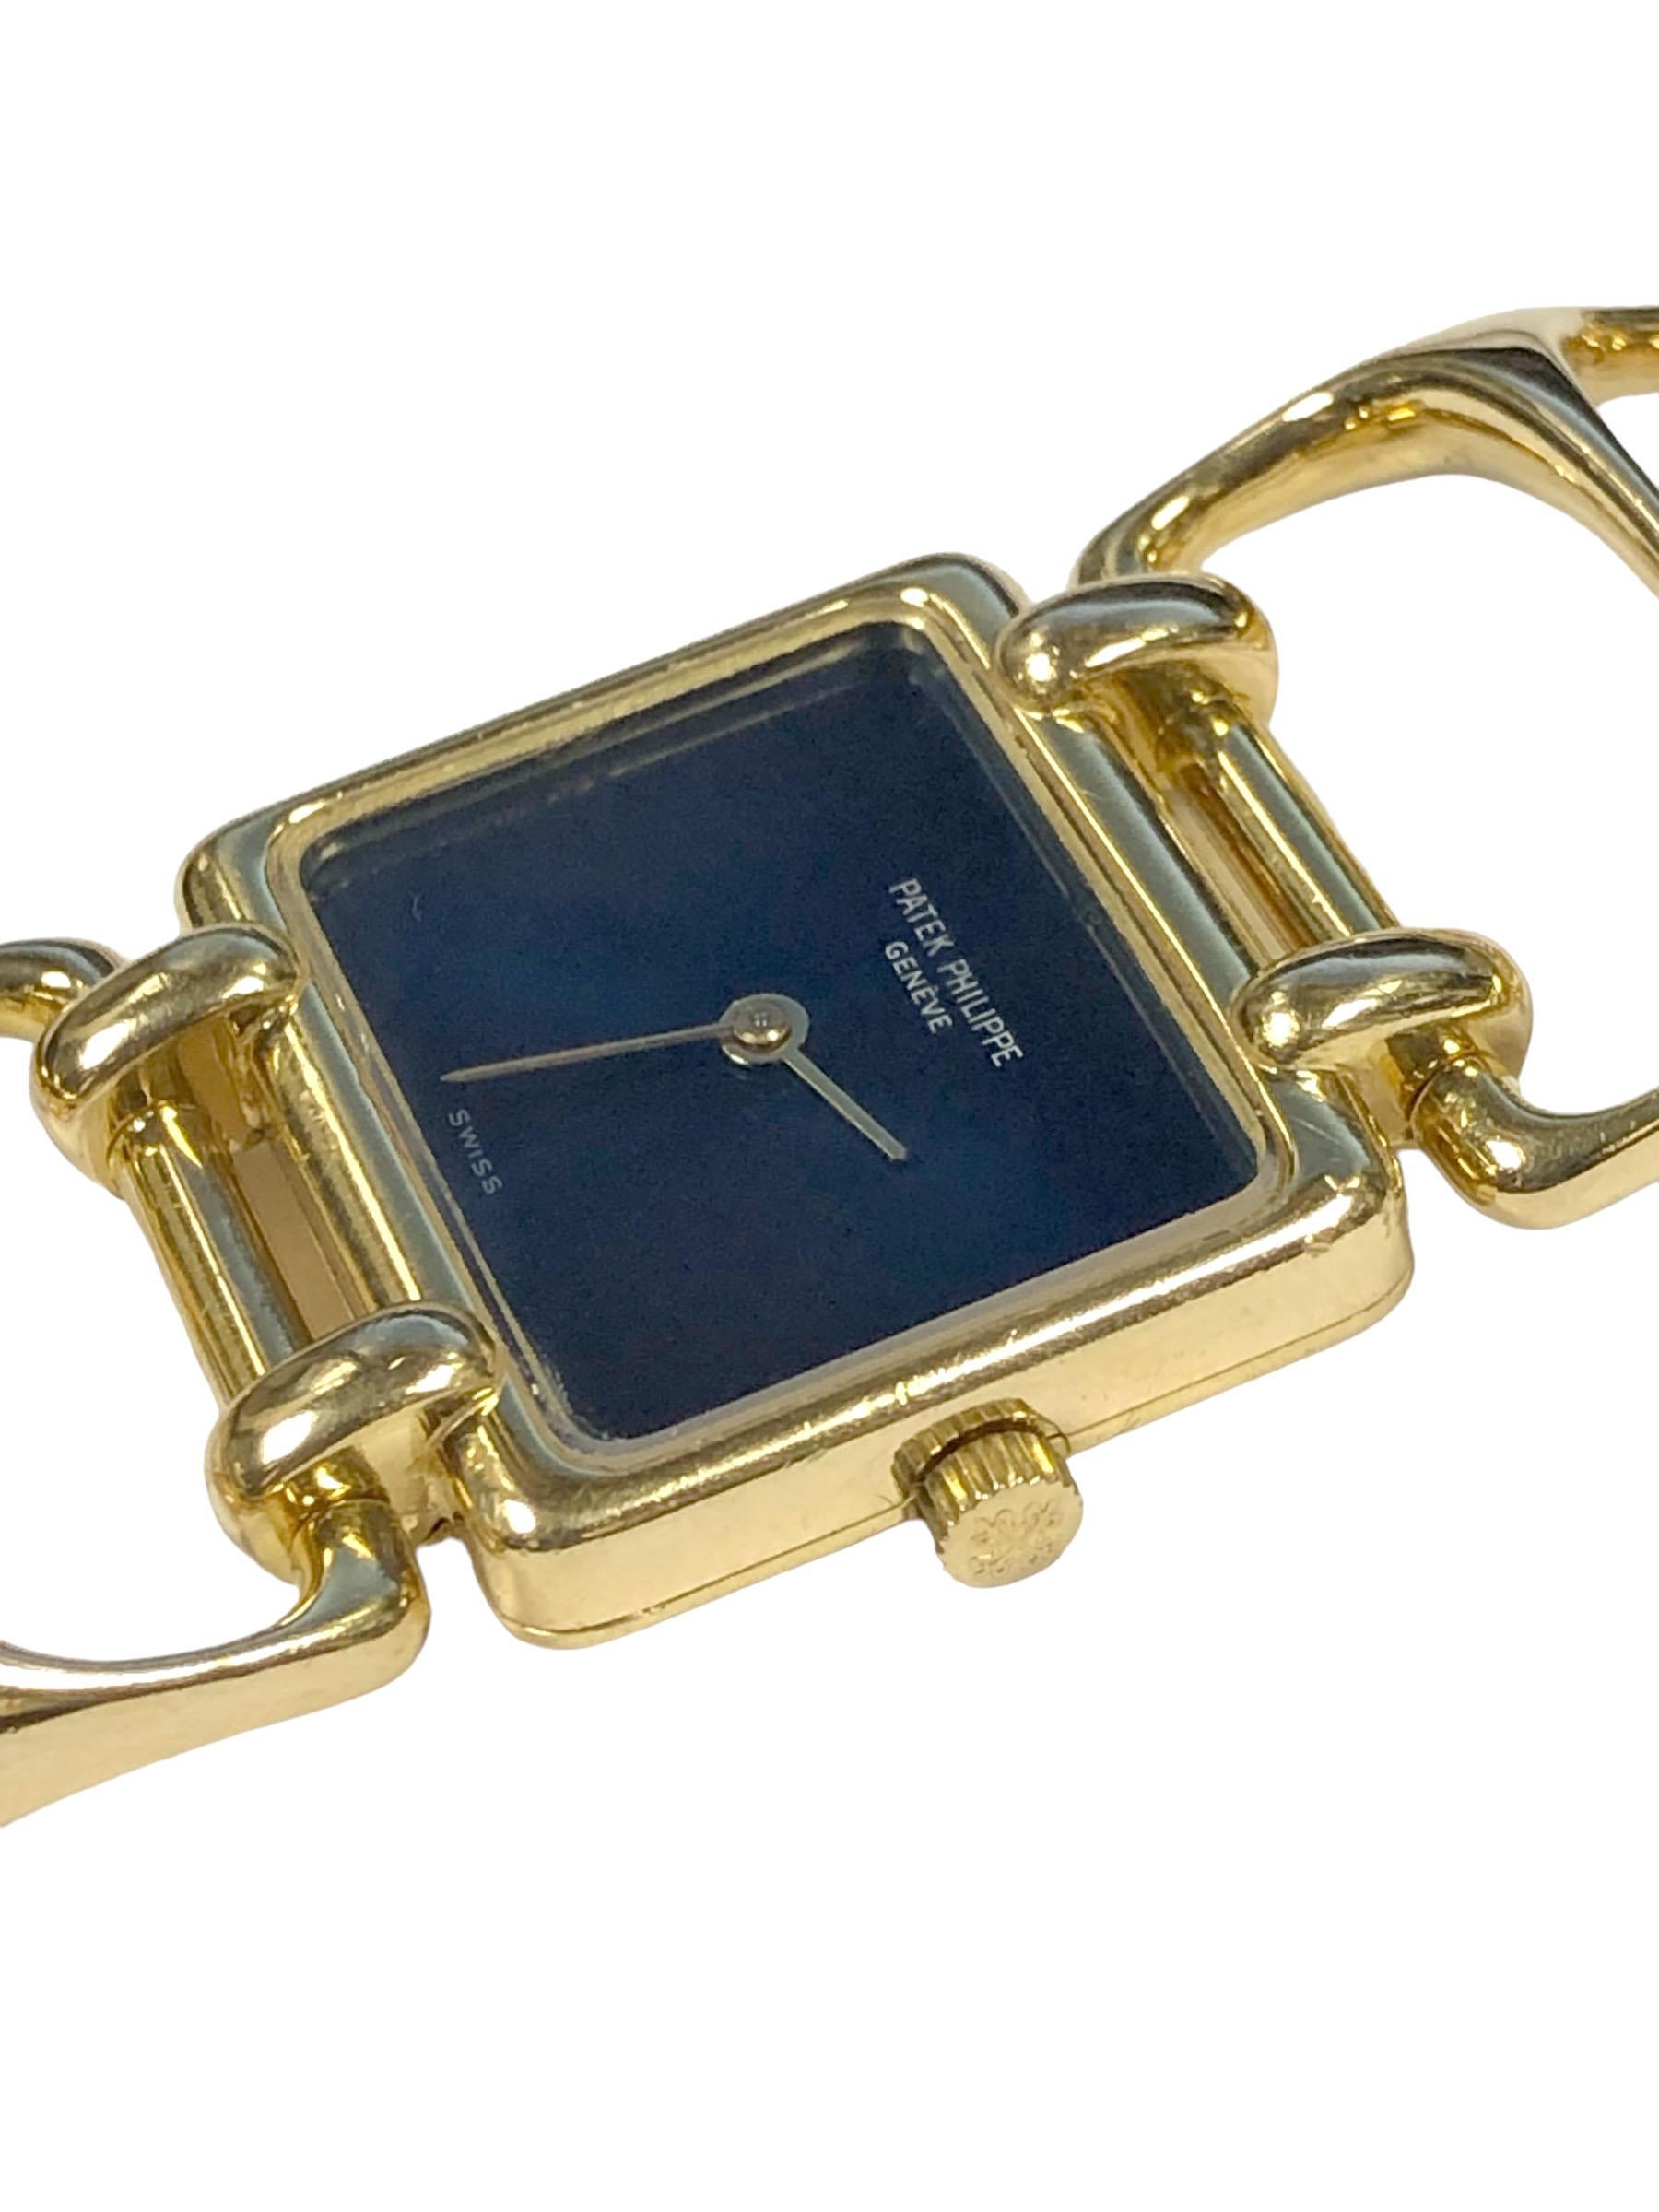 Circa 1970s Patek Philippe Reference 4237 / 1  18k Yellow Gold Bracelet Watch, 25 x 21 M.M 2 Piece case, 18 Jewel Nickle Lever Mechanical, manual wind movement, Blue Satin dial, Glass Crystal and Patek logo Crown. 1 inch wide Modernistic style